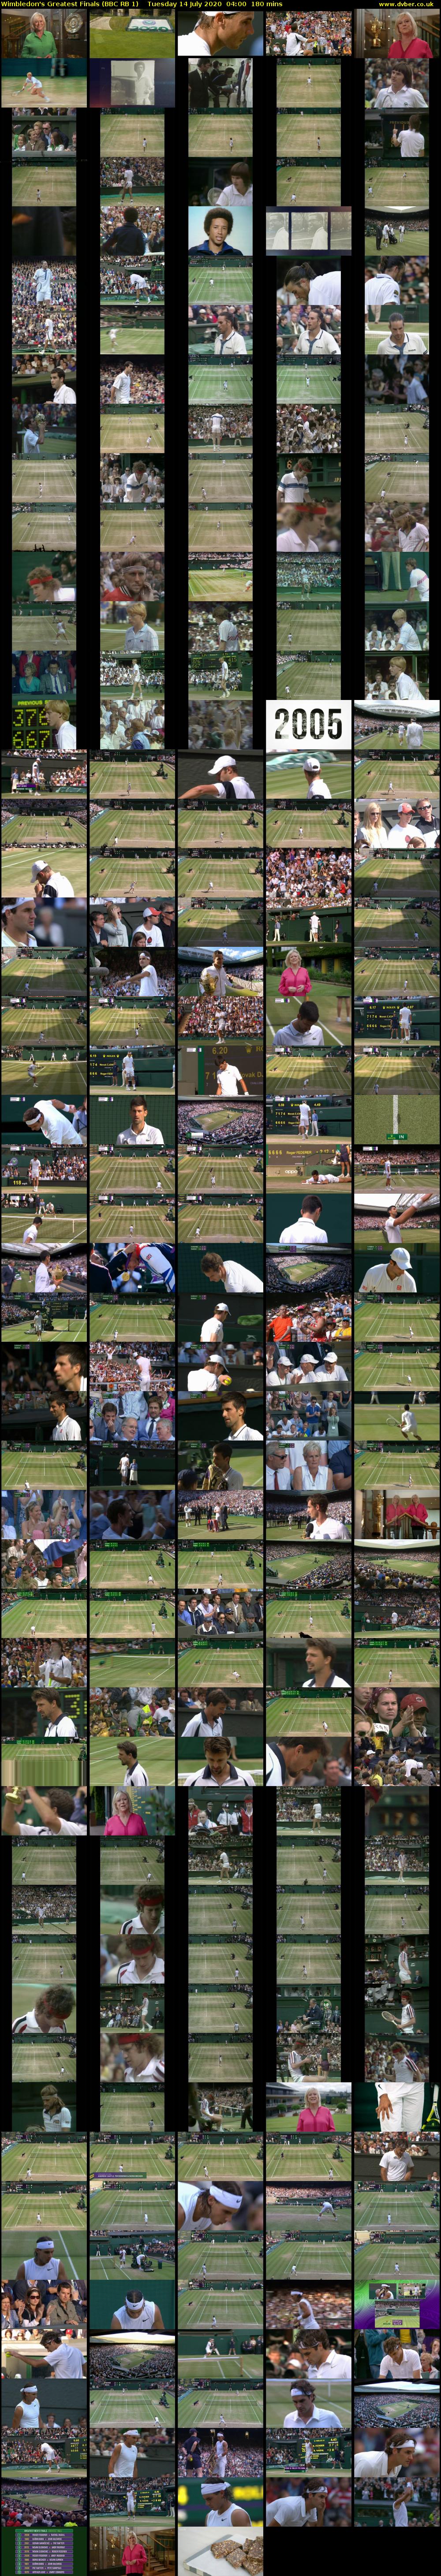 Wimbledon's Greatest Finals (BBC RB 1) Tuesday 14 July 2020 04:00 - 07:00